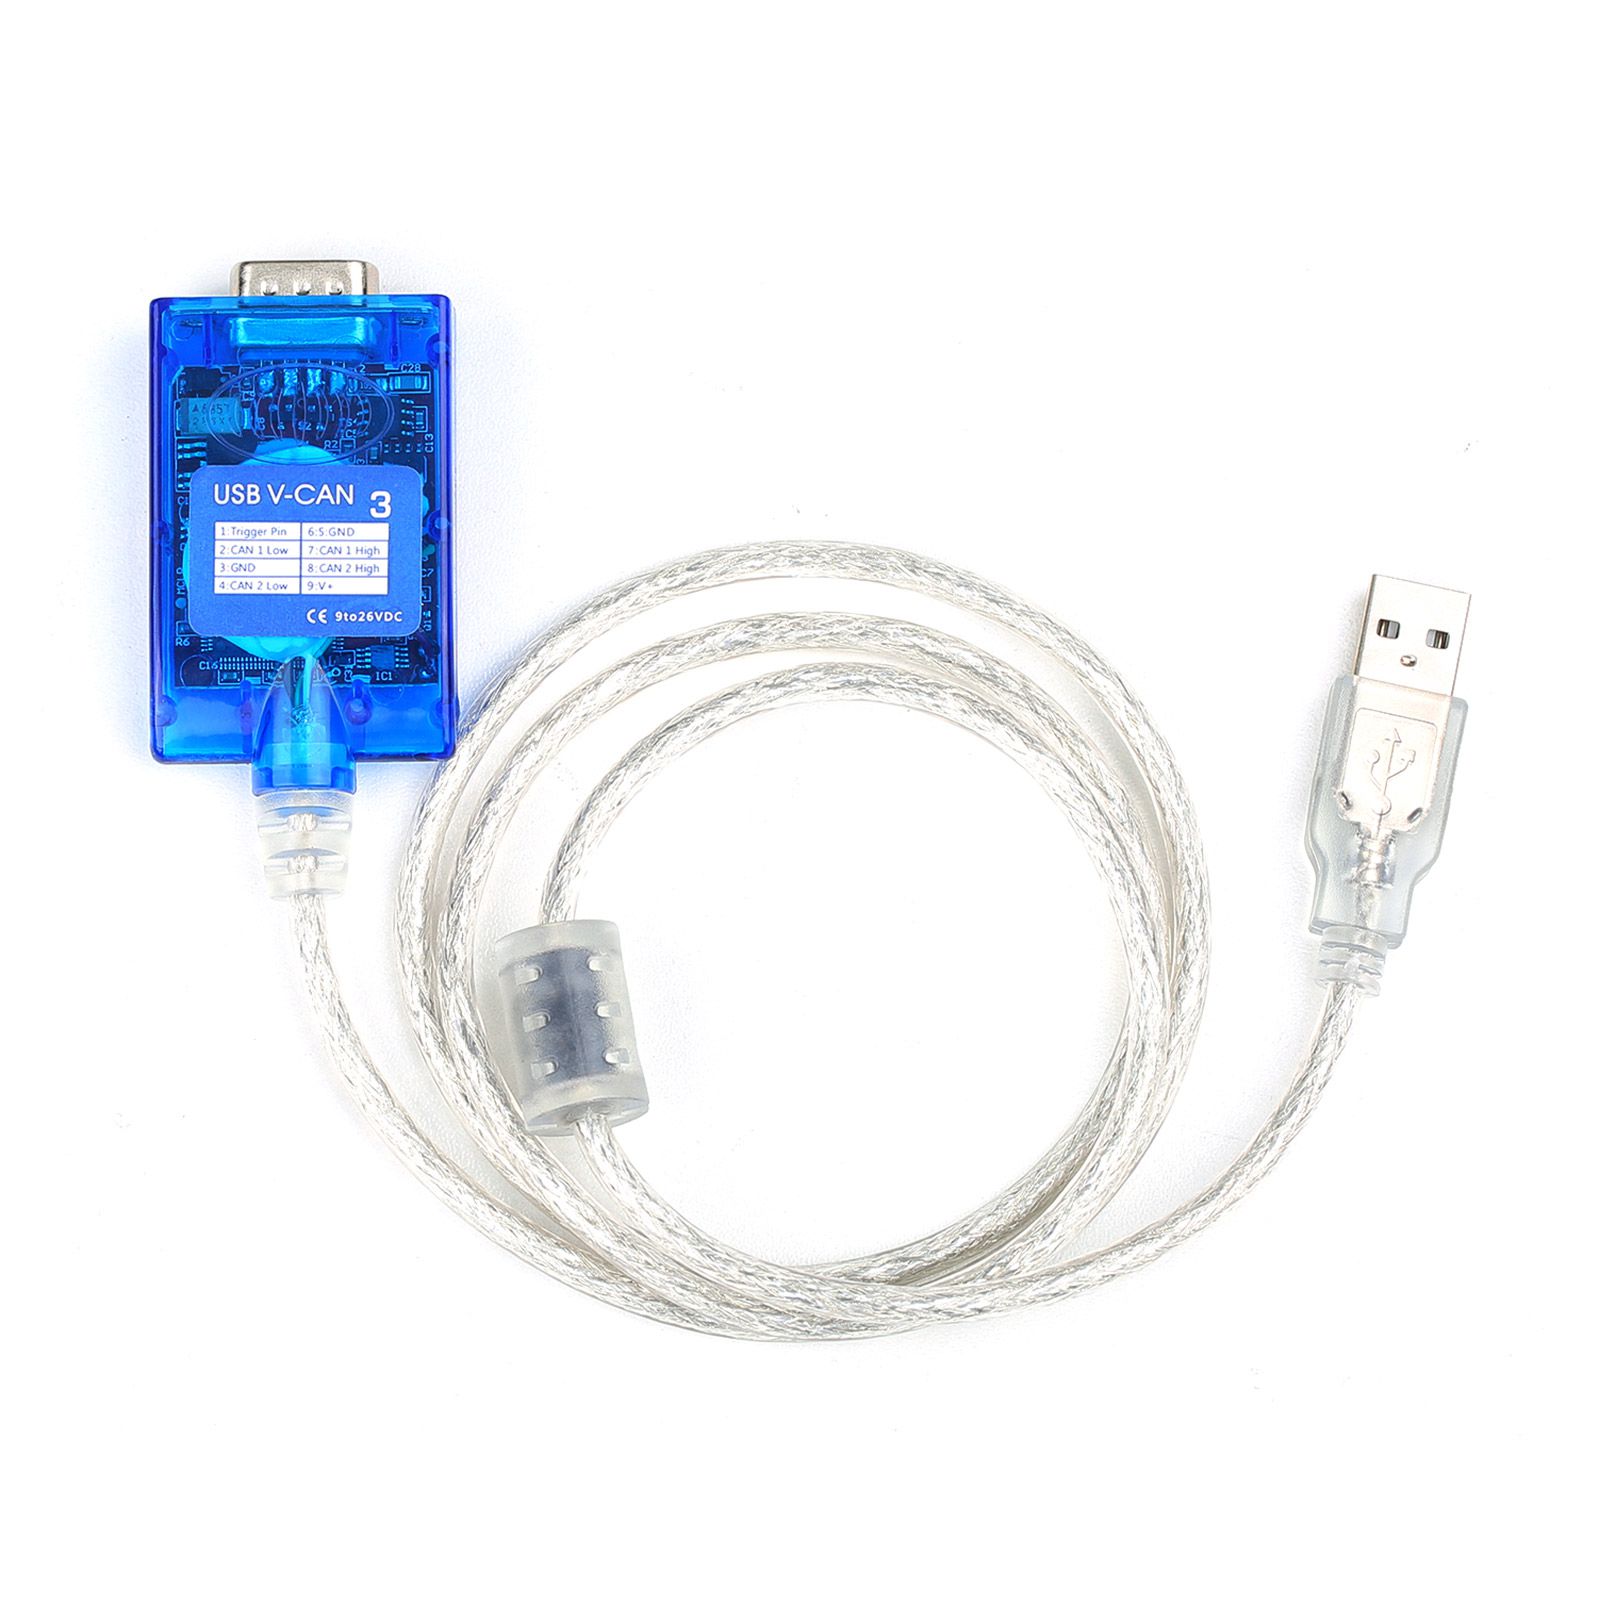 USB V-CAN3 Automotive CAN Network Test Equipment Connecting PC and CAN Network Self Powered from USB